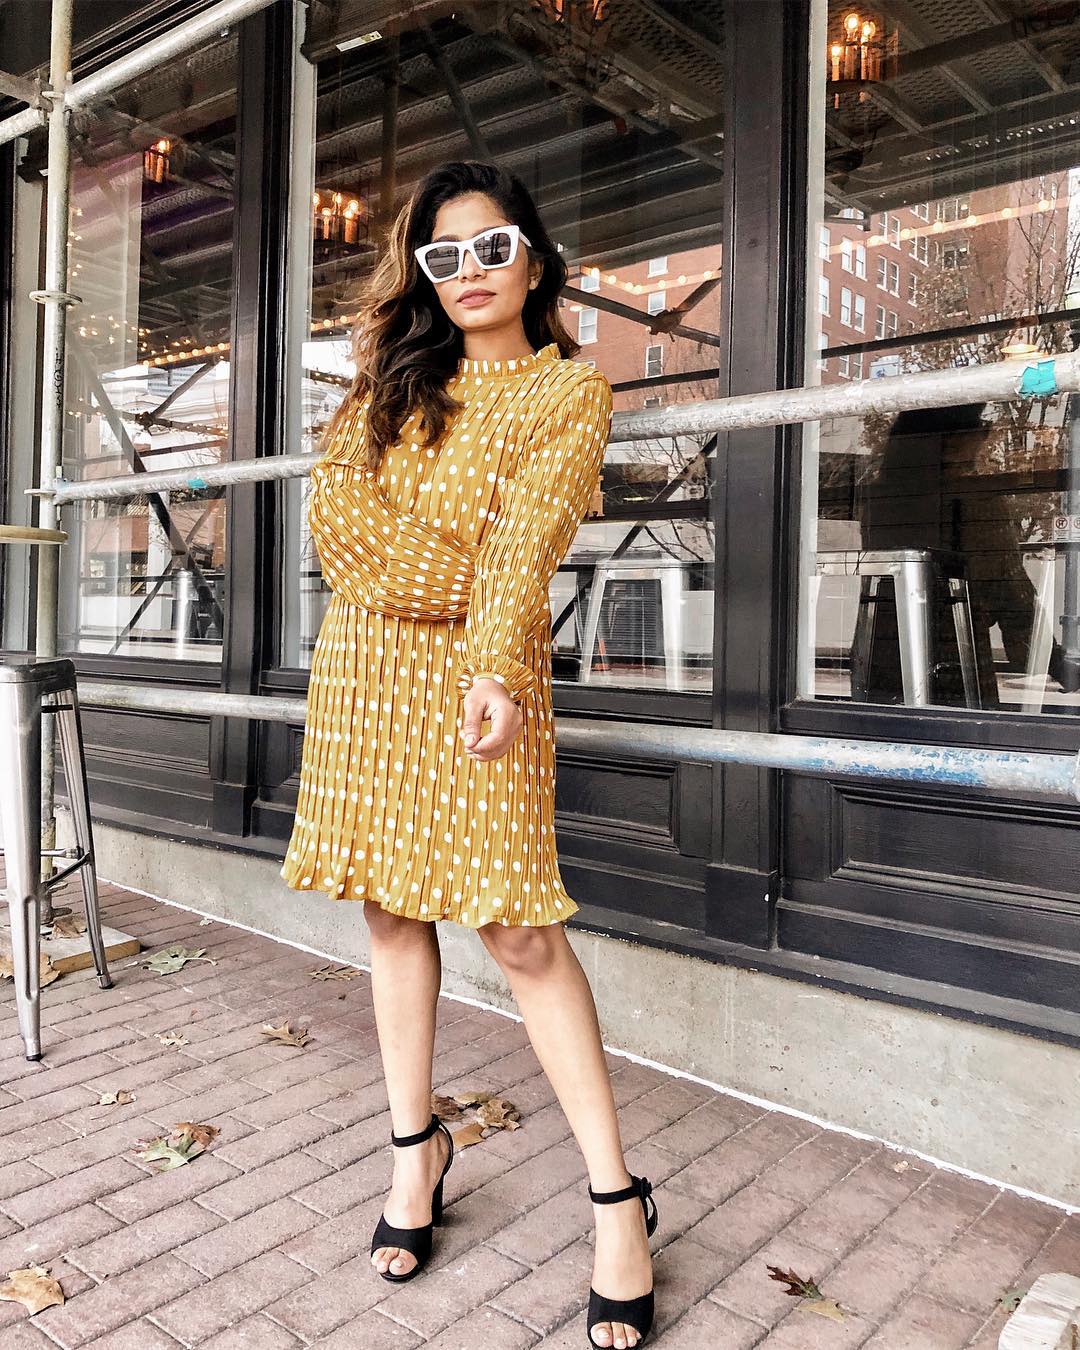 spring outfit ideas - polka dot dress + ankle strap heels + sunglasses